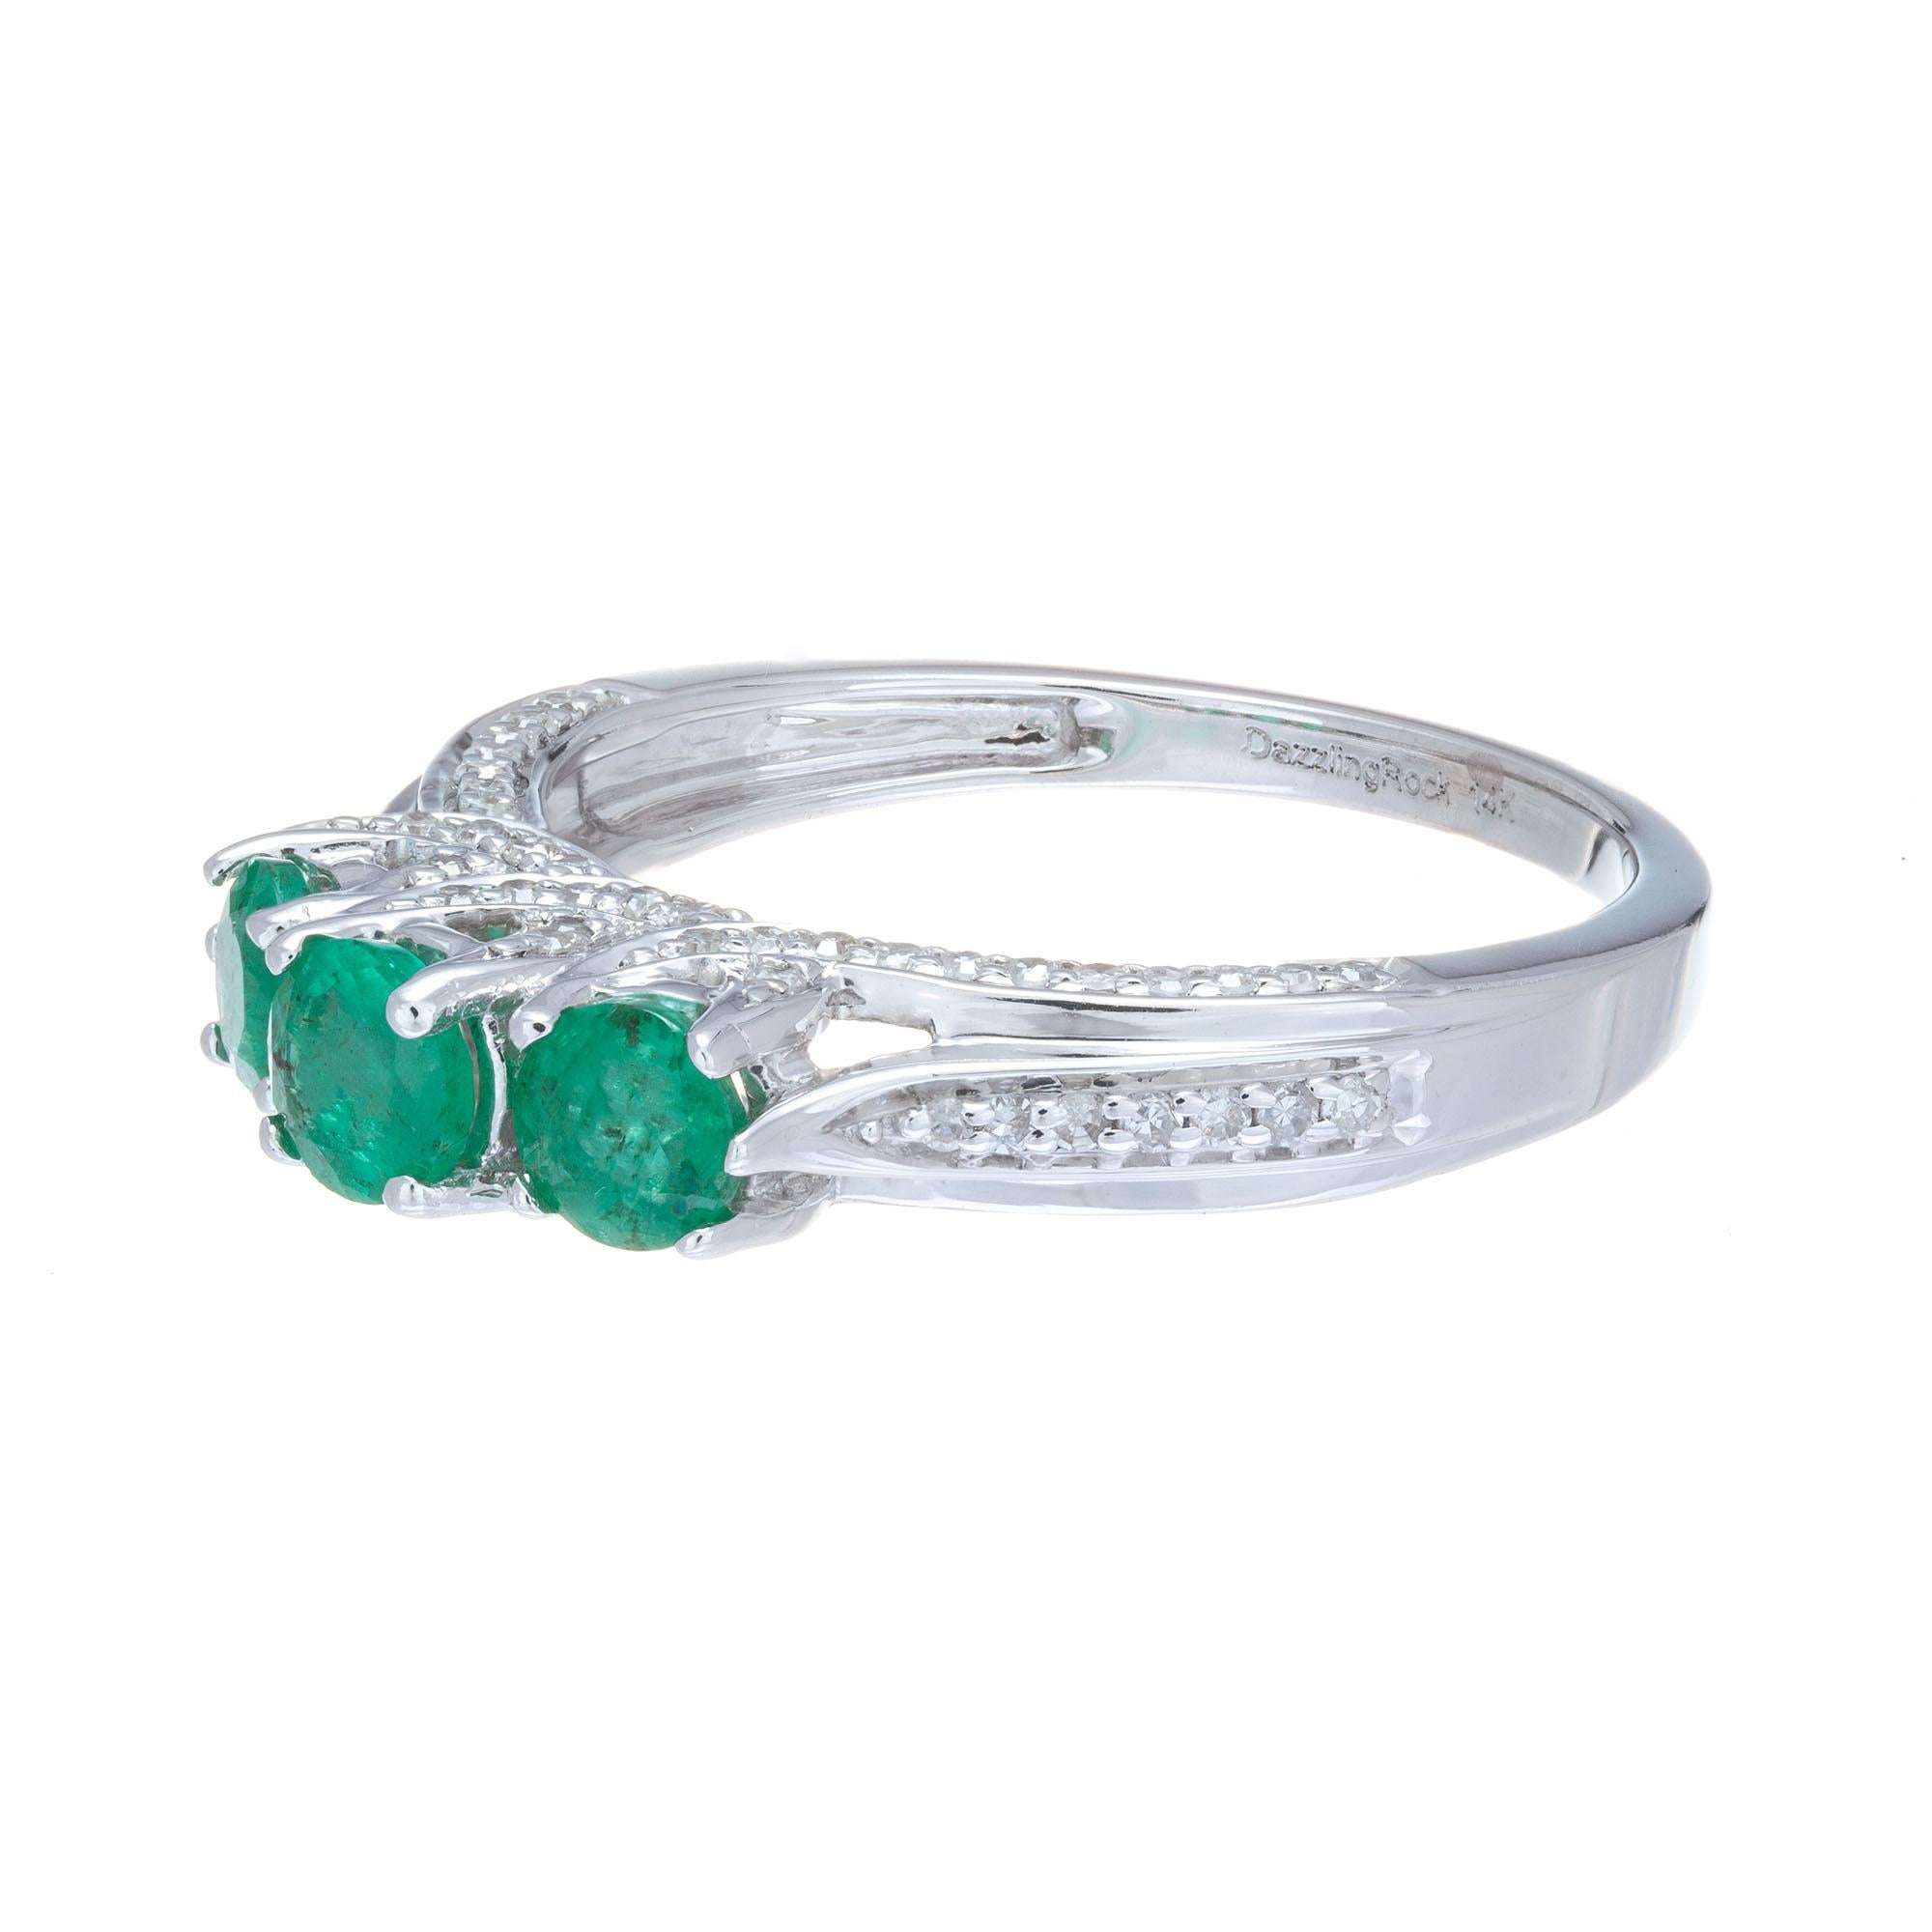 Emerald three-stone ring with three bright green emeralds in curved prongs with 78 diamond accents in 14k white gold. 

3 round green emeralds, approx. .65cts
78 single cut diamonds H-I SI, approx. .58cts
Size 7 and sizable 
14k white gold 
Stamped: